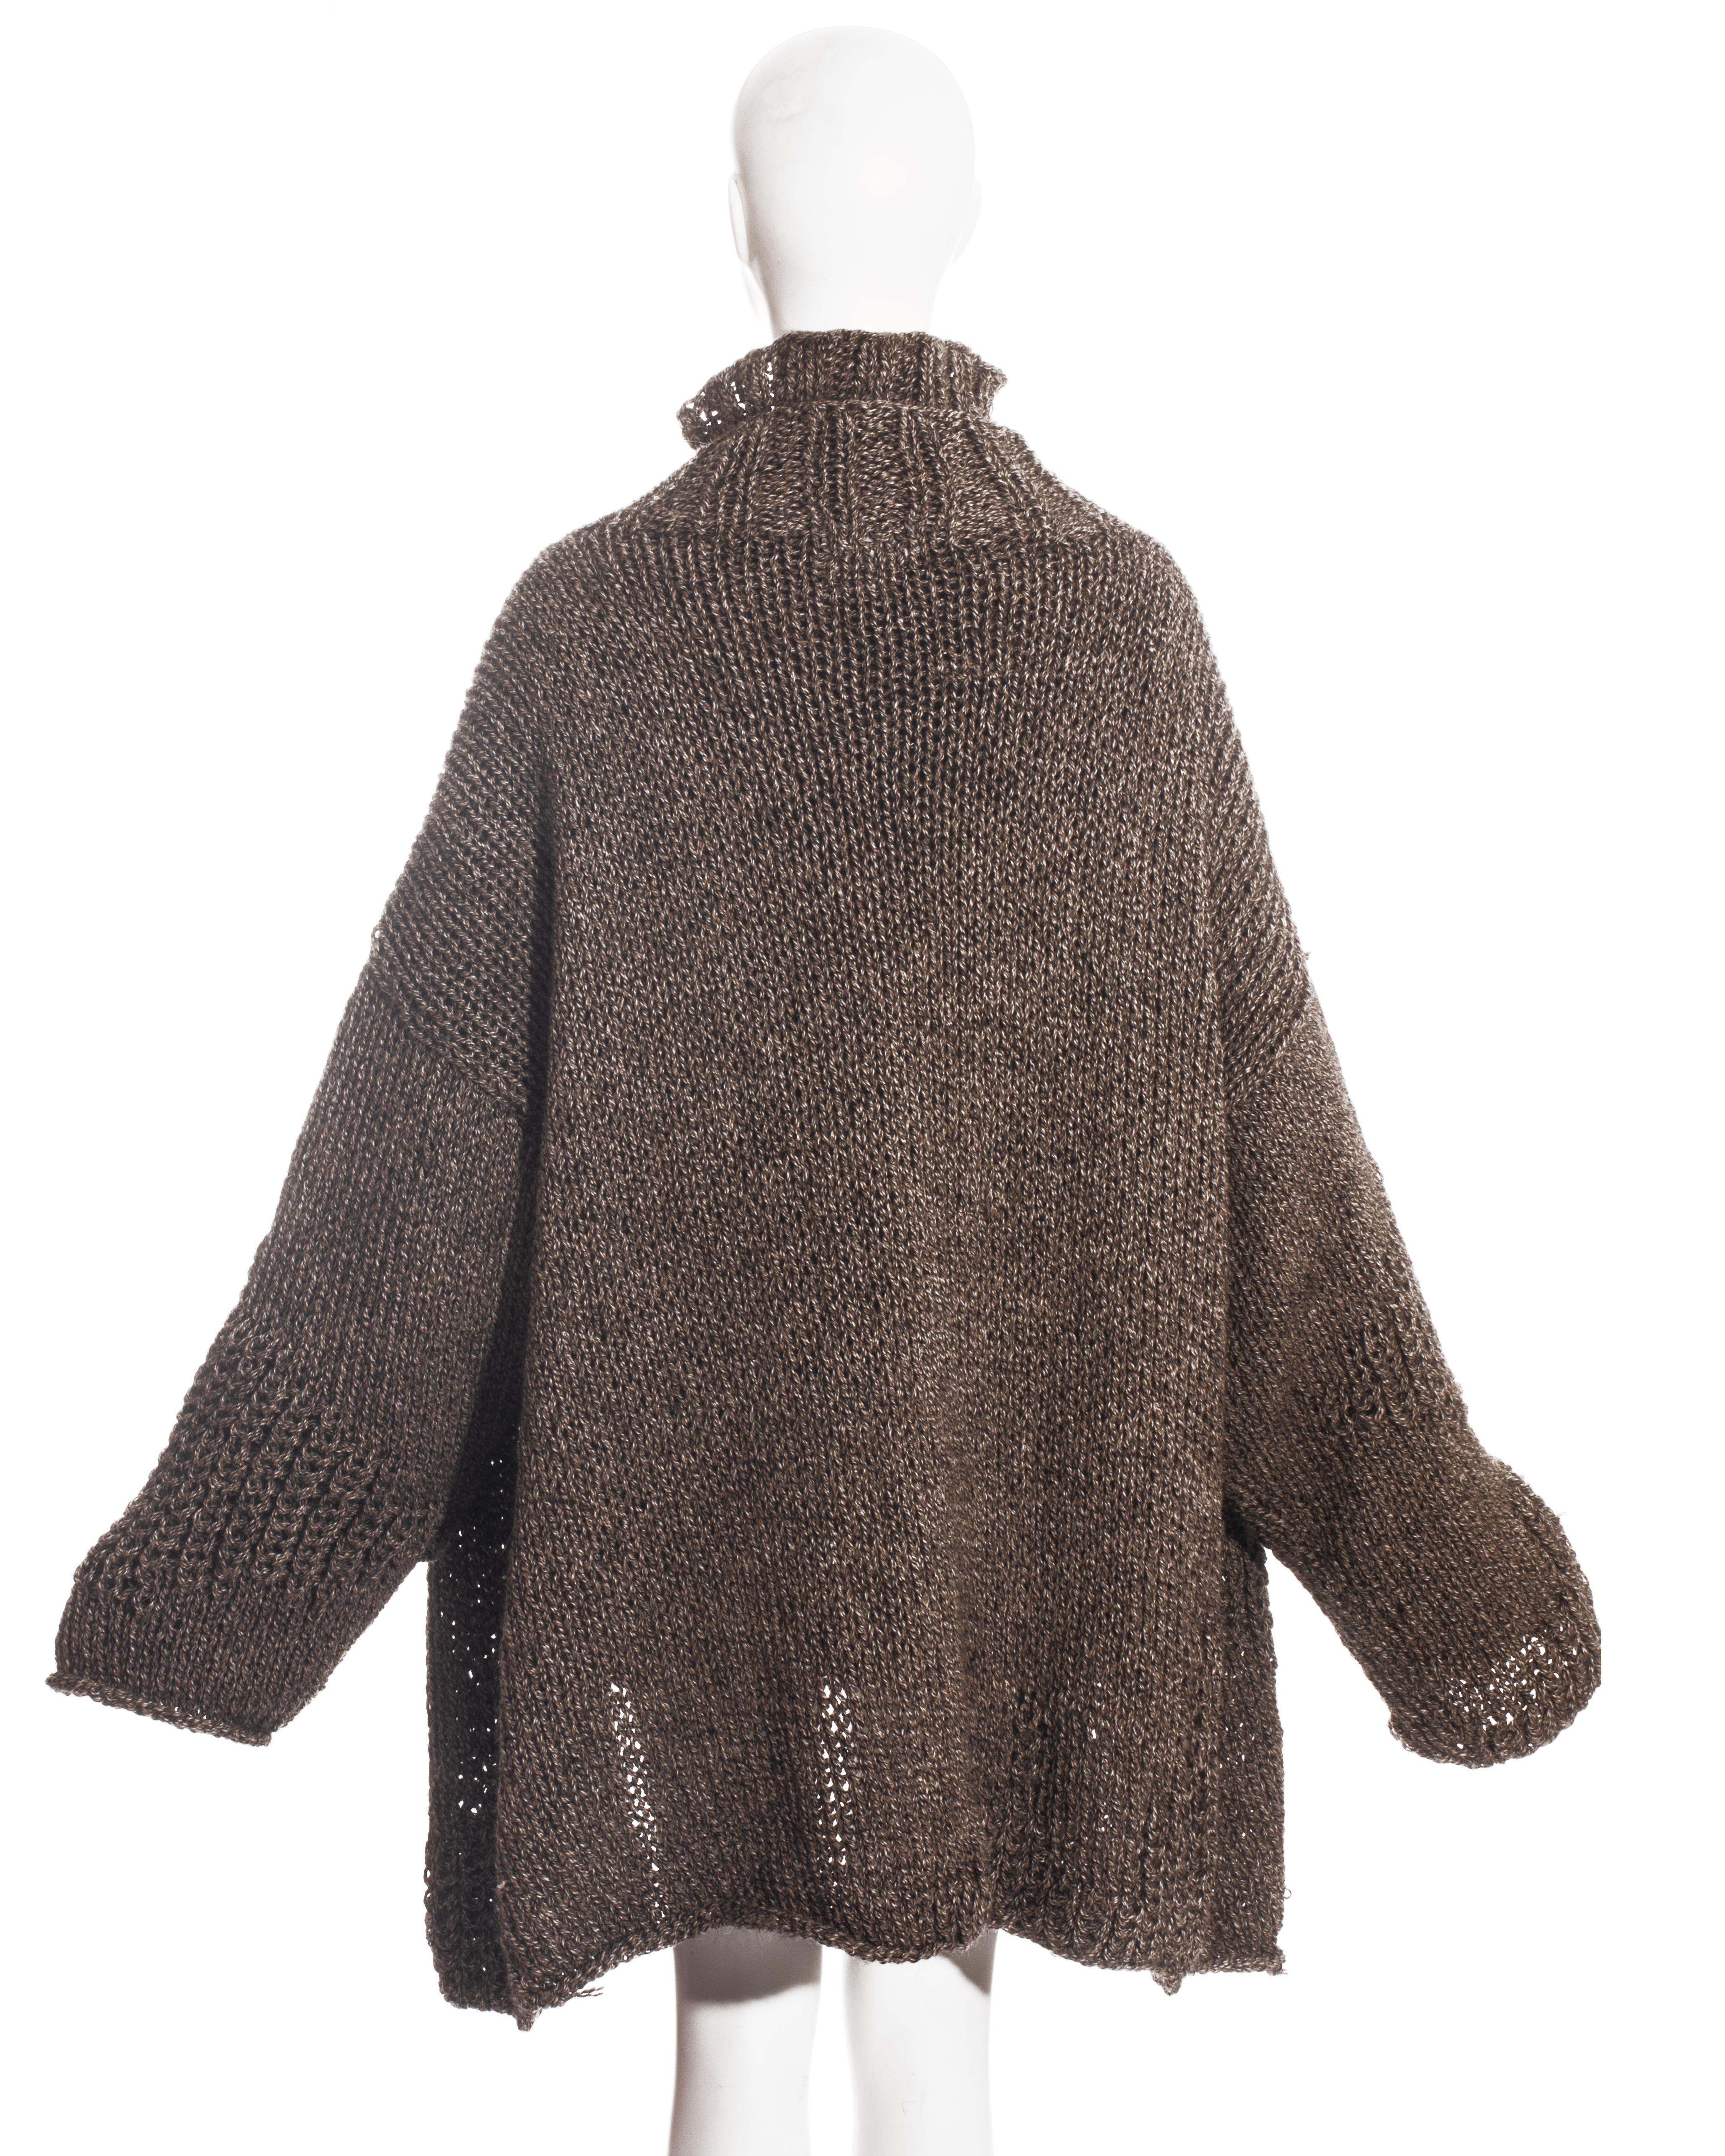 Yohji Yamamoto brown knitted wool oversized cardigan and sweater, fw 1984 In Excellent Condition For Sale In London, GB